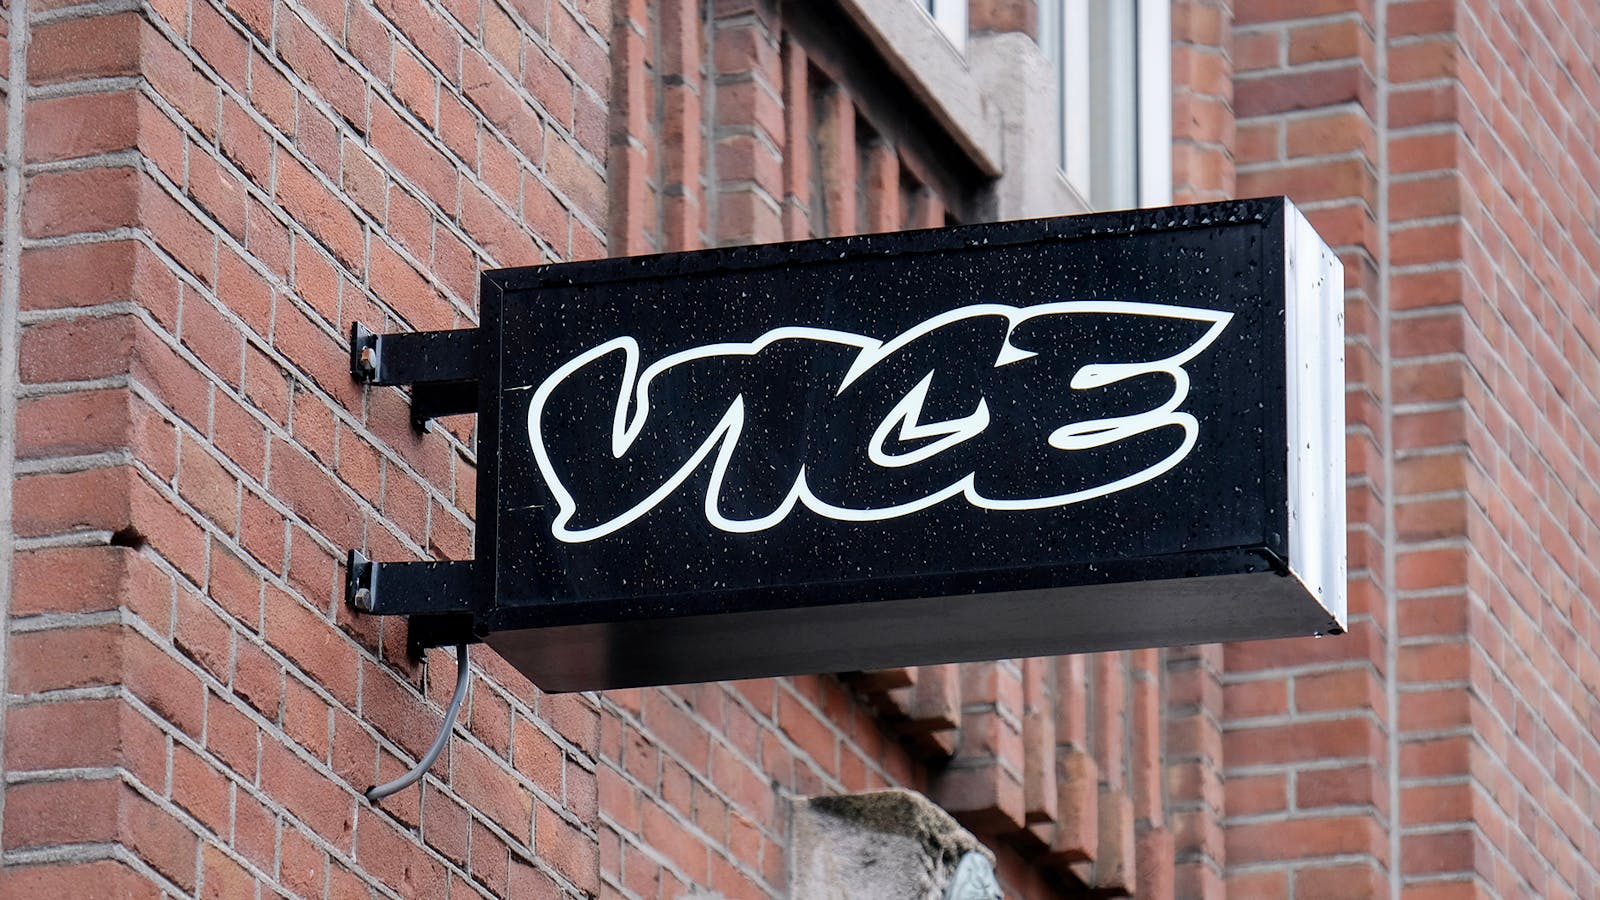 Vice Media's office in Amsterdam. Photo by Shutterstock.